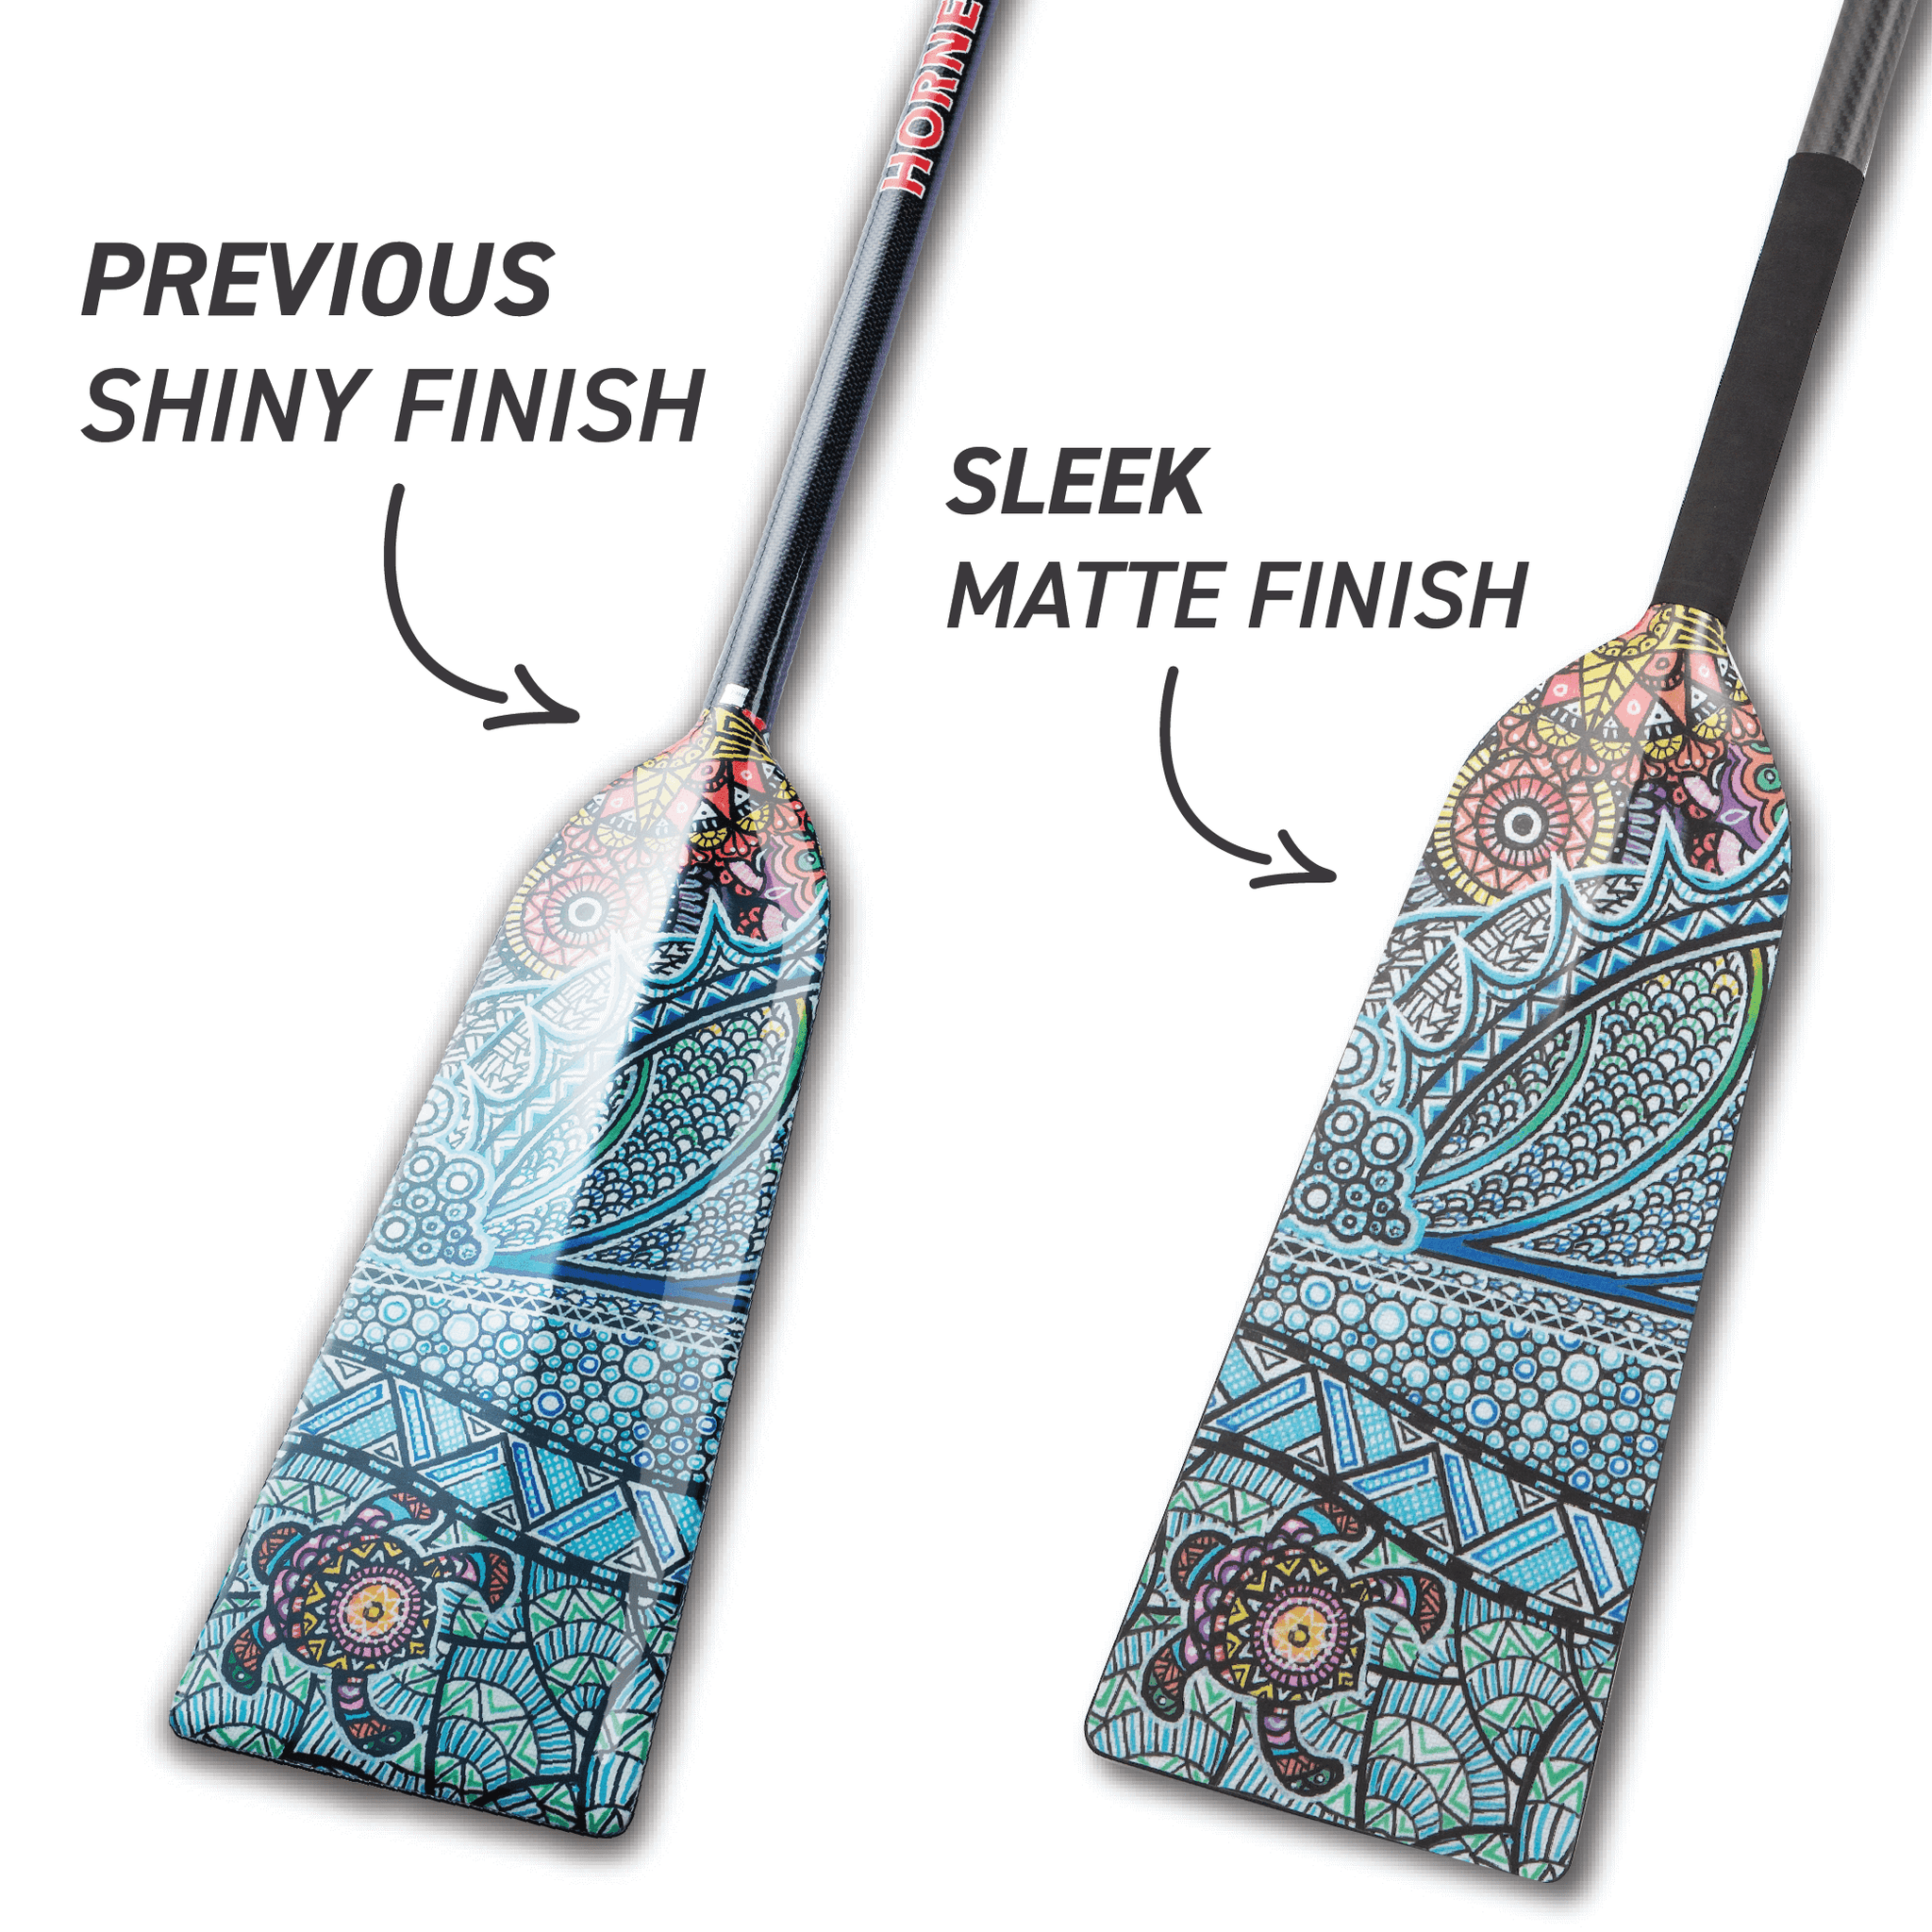 CLEARANCE- Factory Seconds: Black Glossy X0 Sting+ Adjustable Dragon Boat Paddle